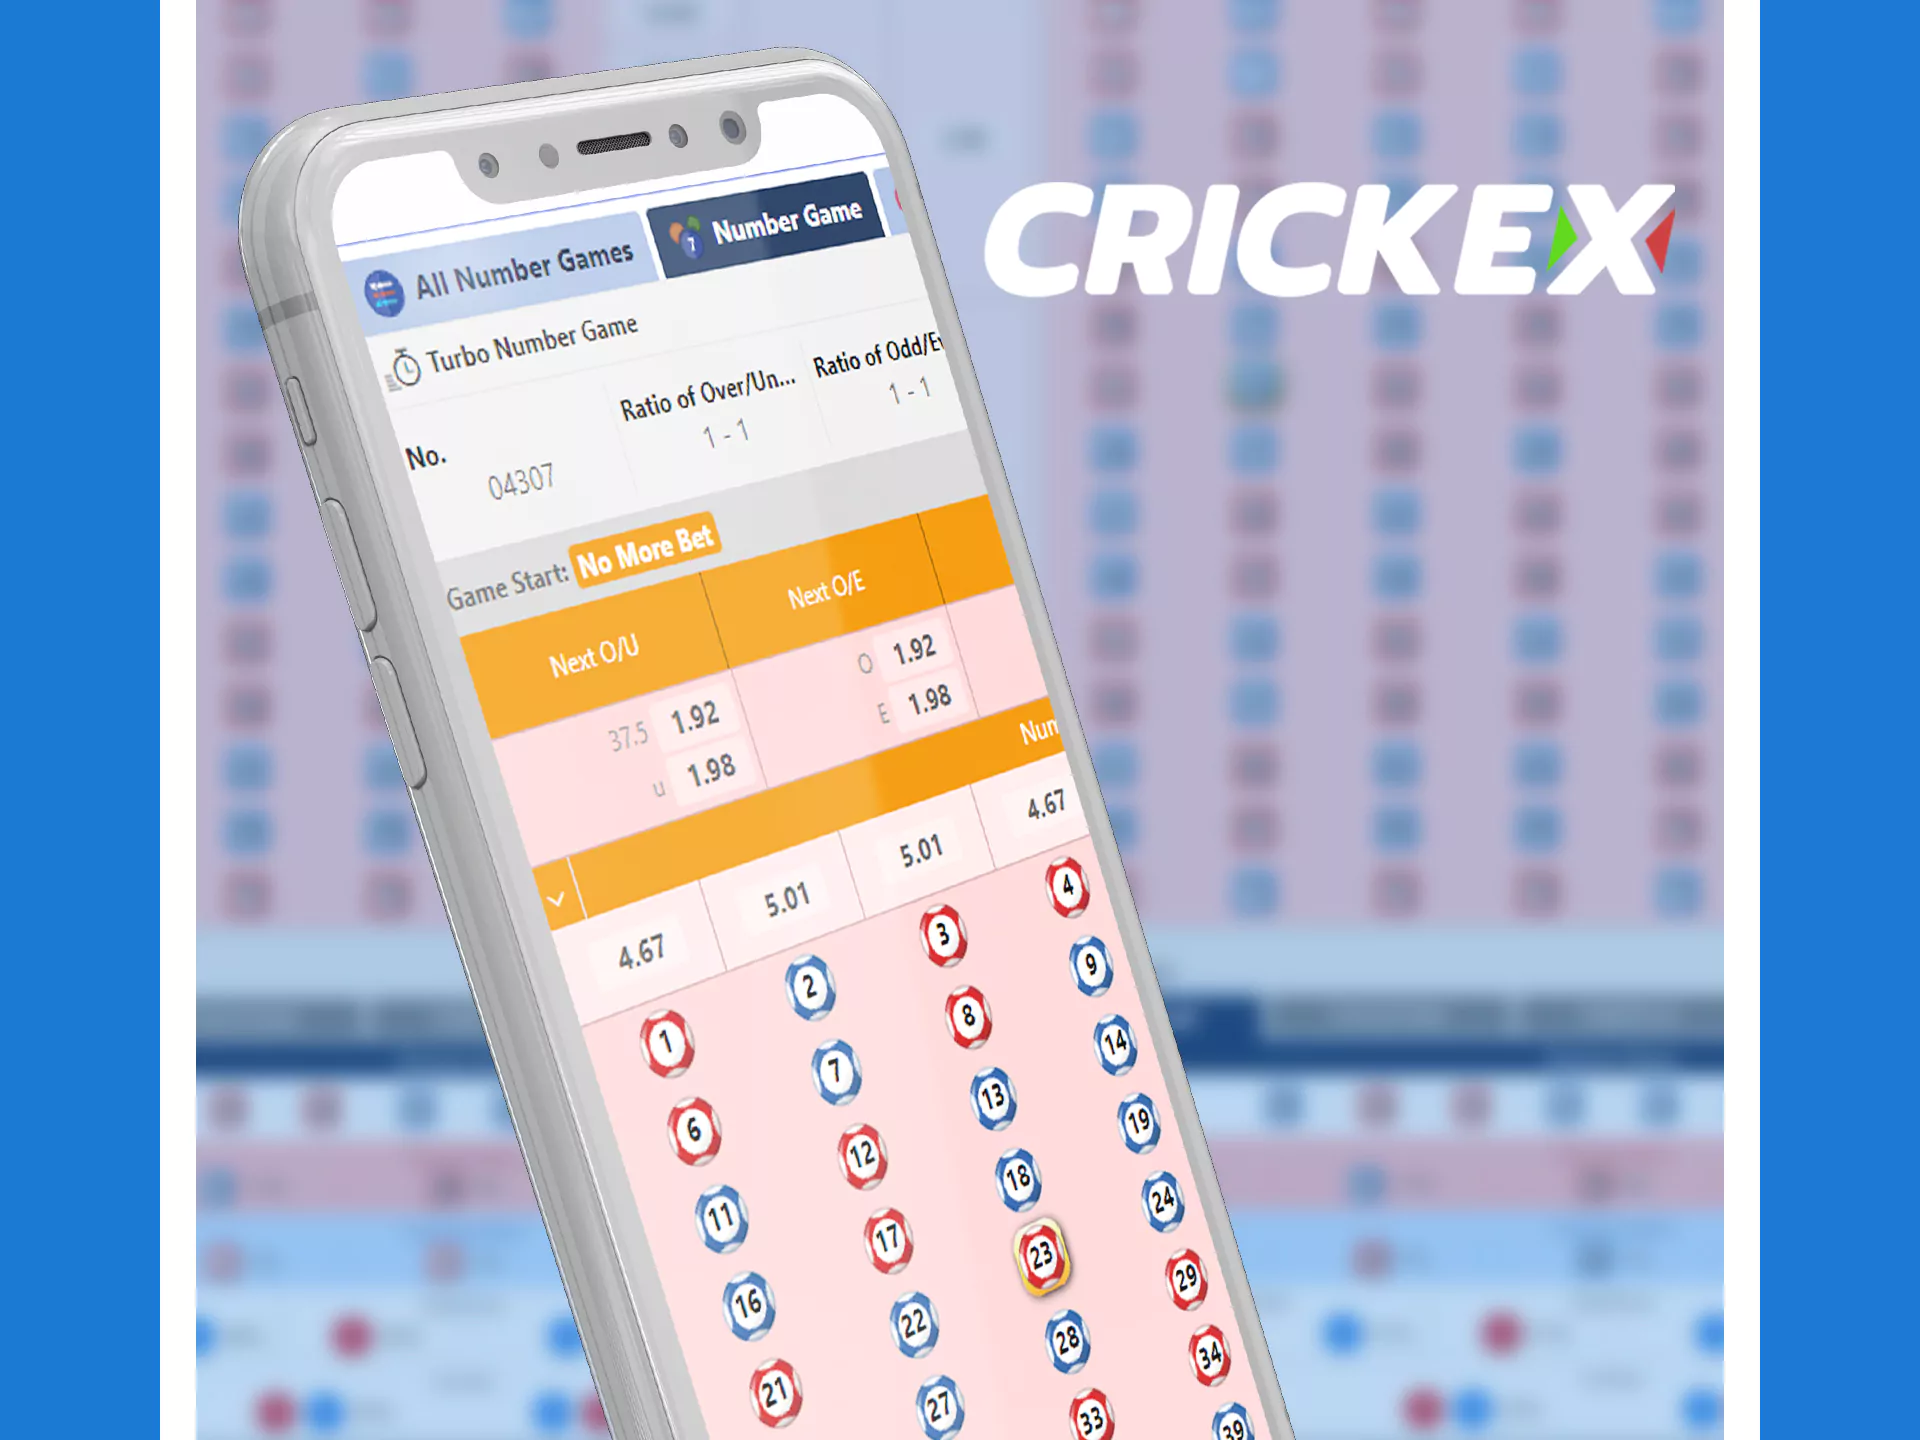 There are many types of casino games available in the Crickex app.